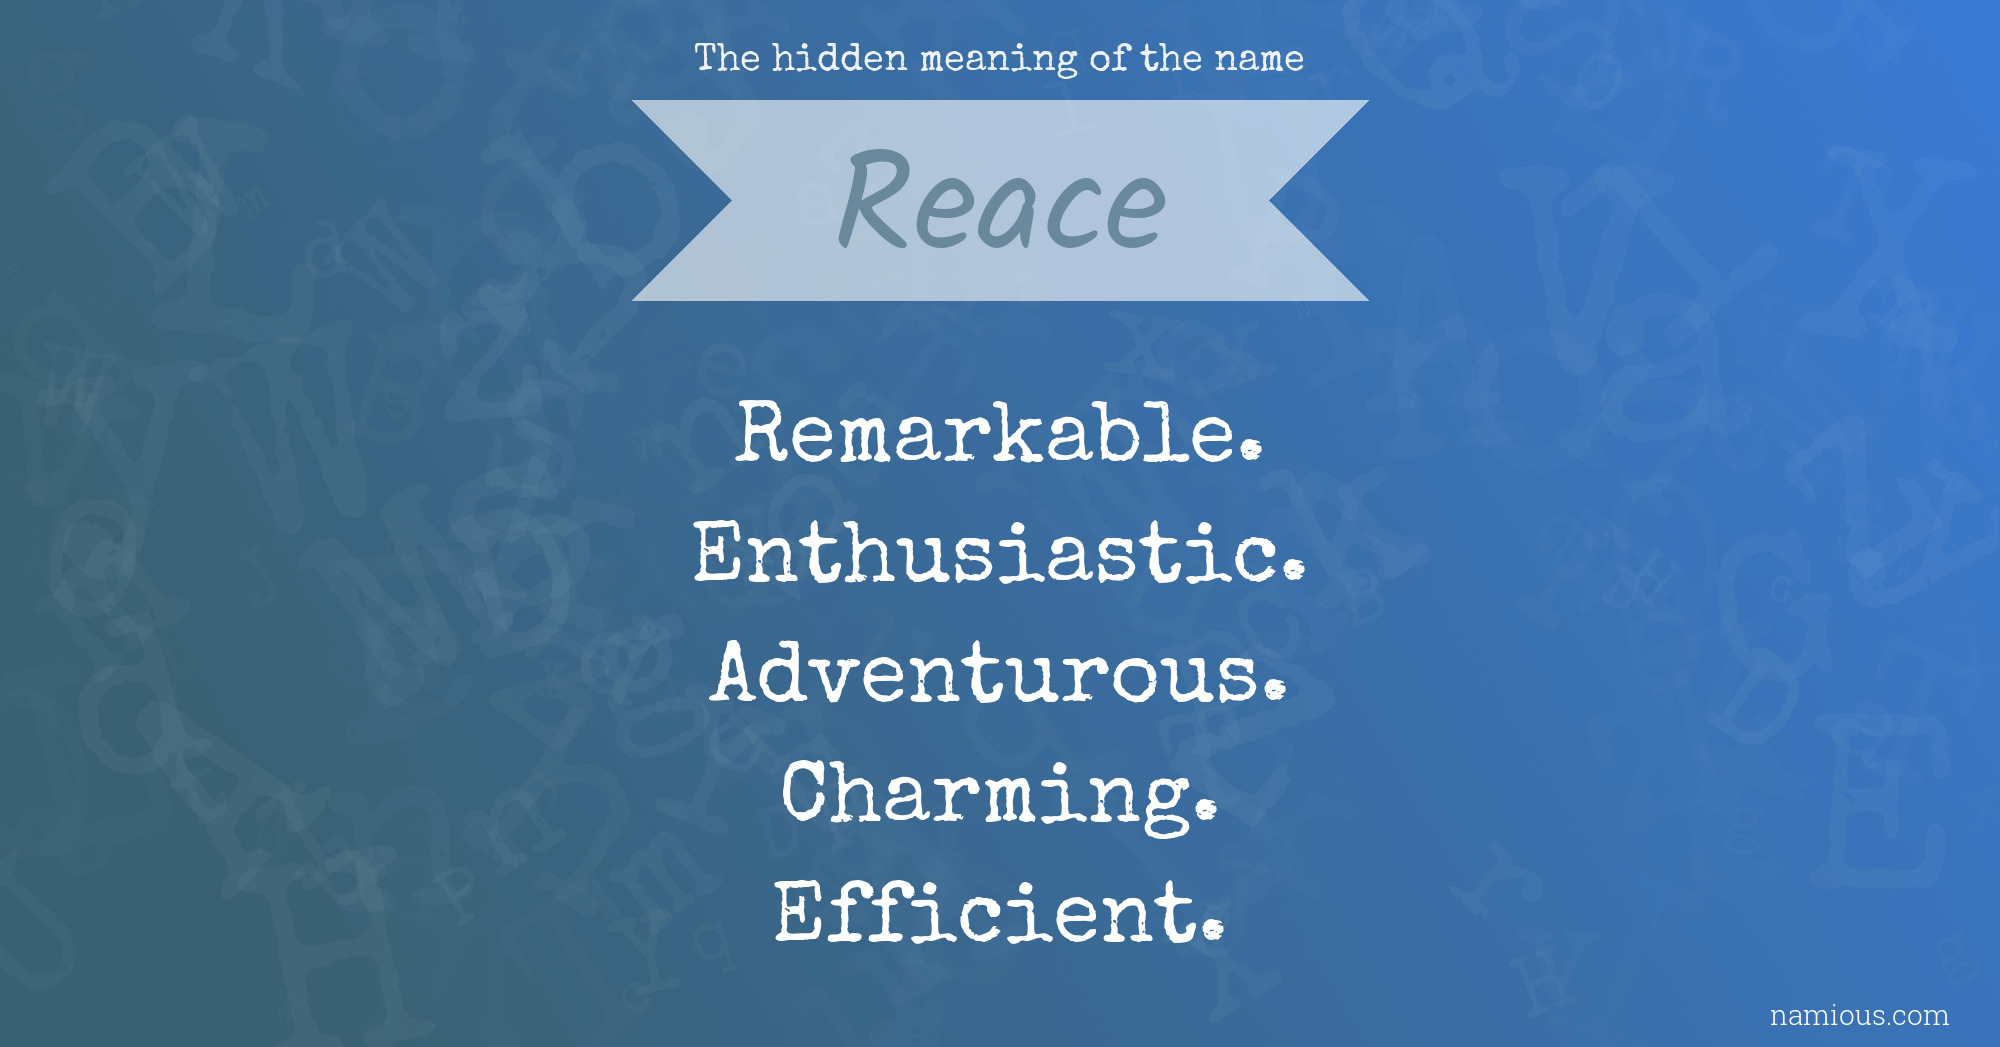 The hidden meaning of the name Reace